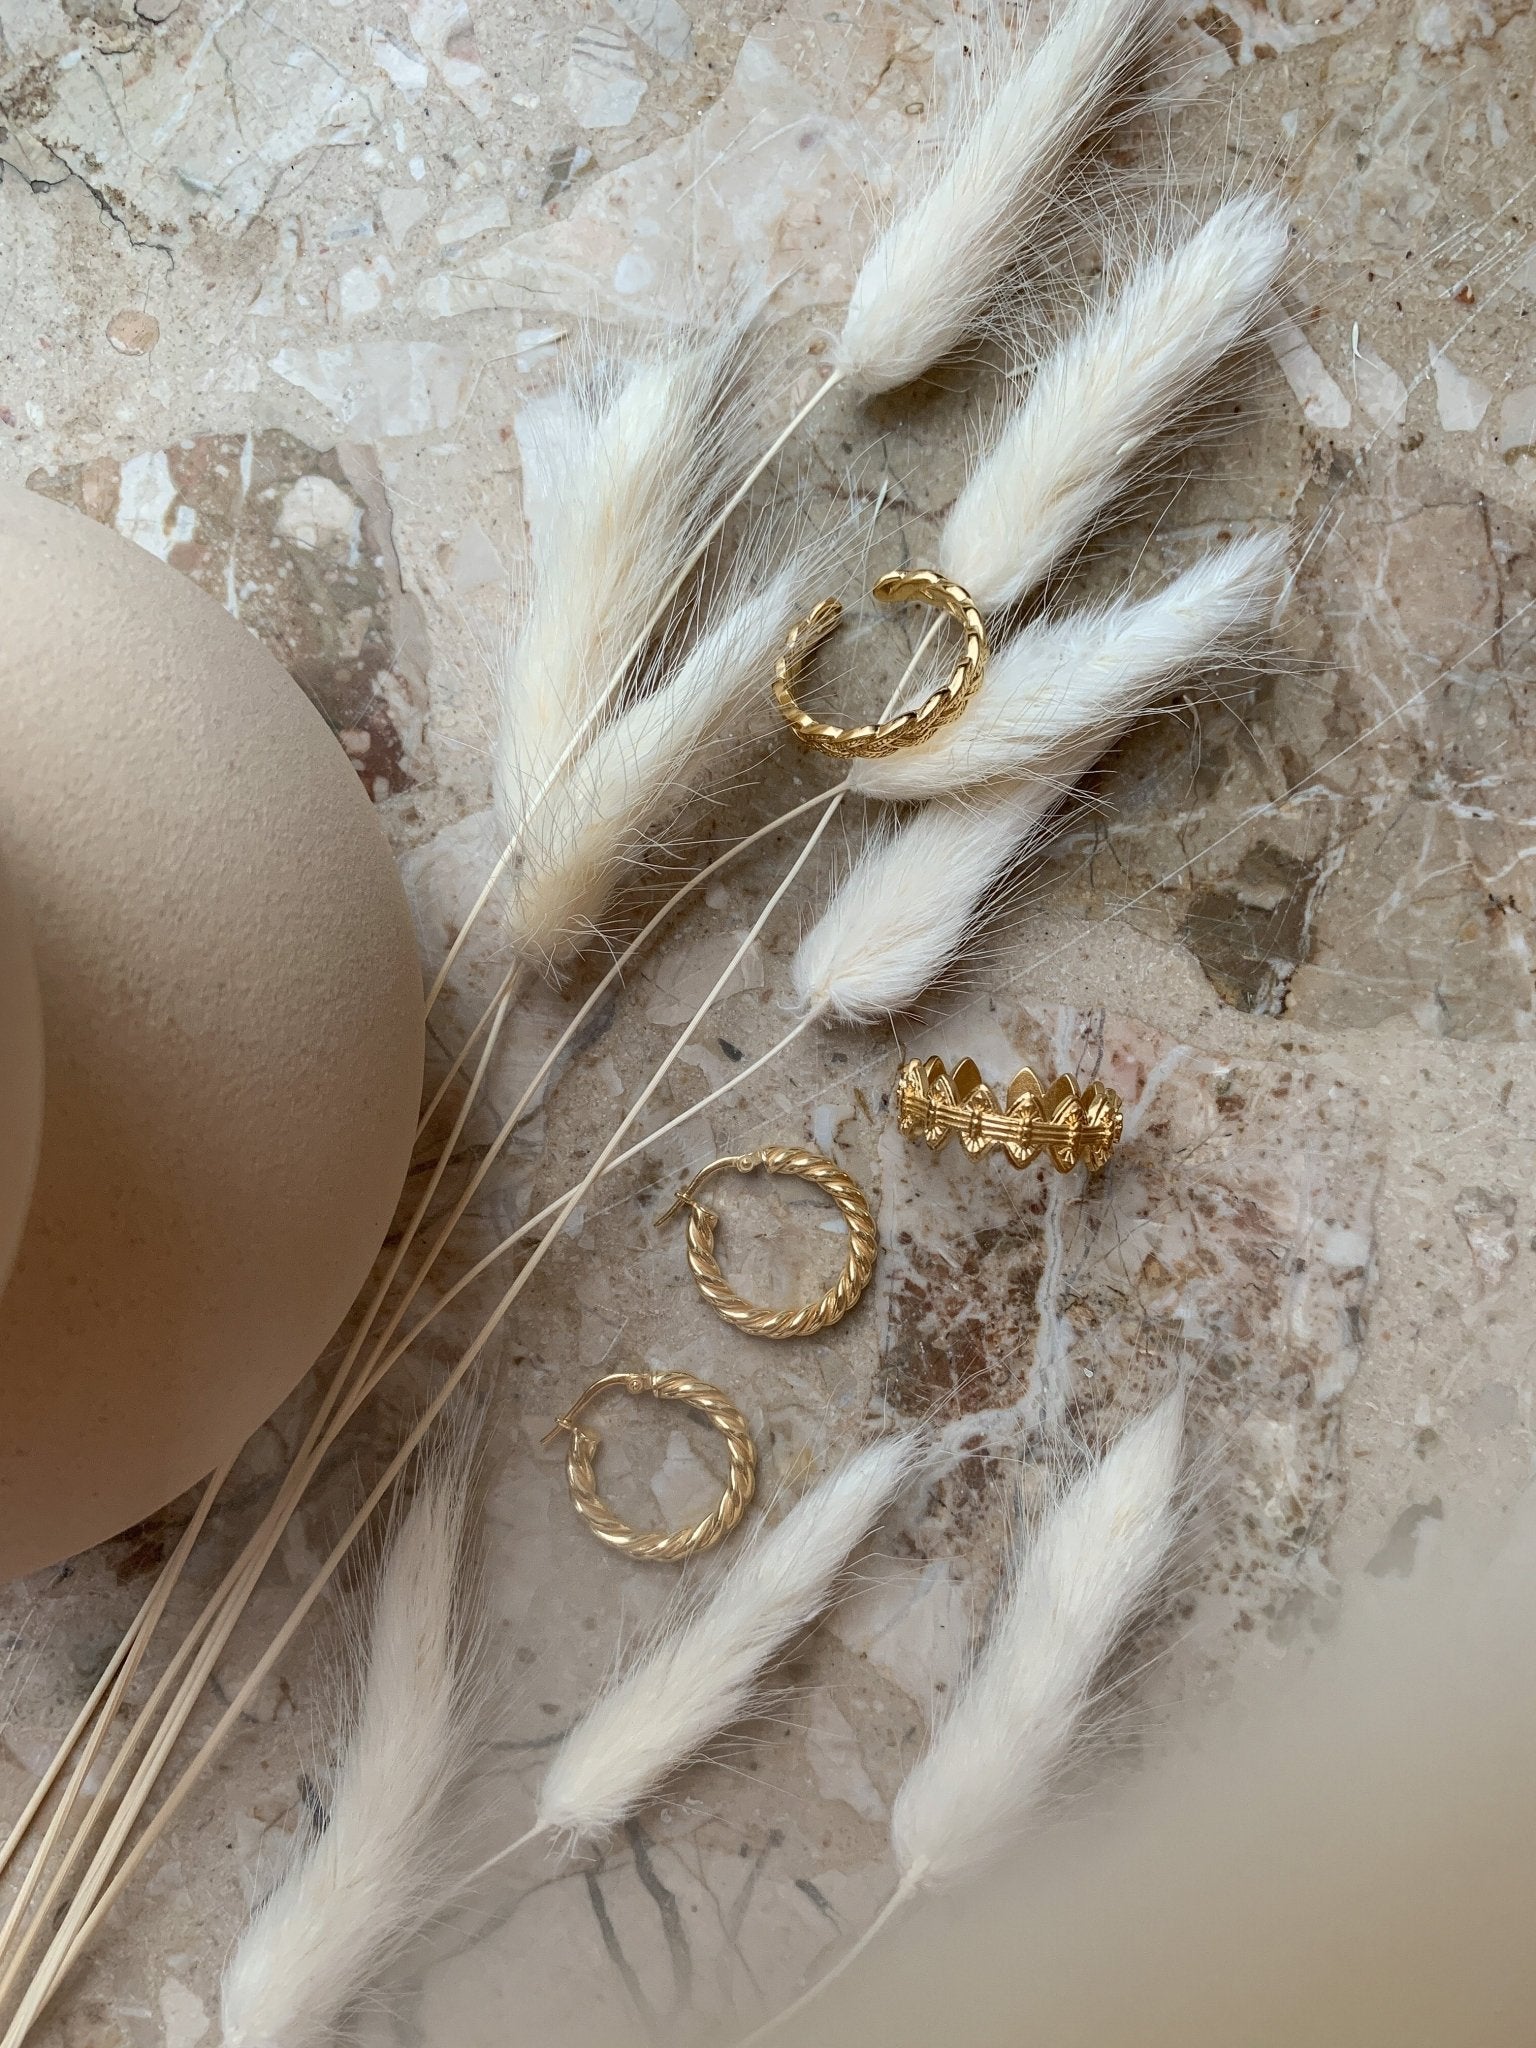 How to Photograph Jewelry for Etsy - B&C Camera